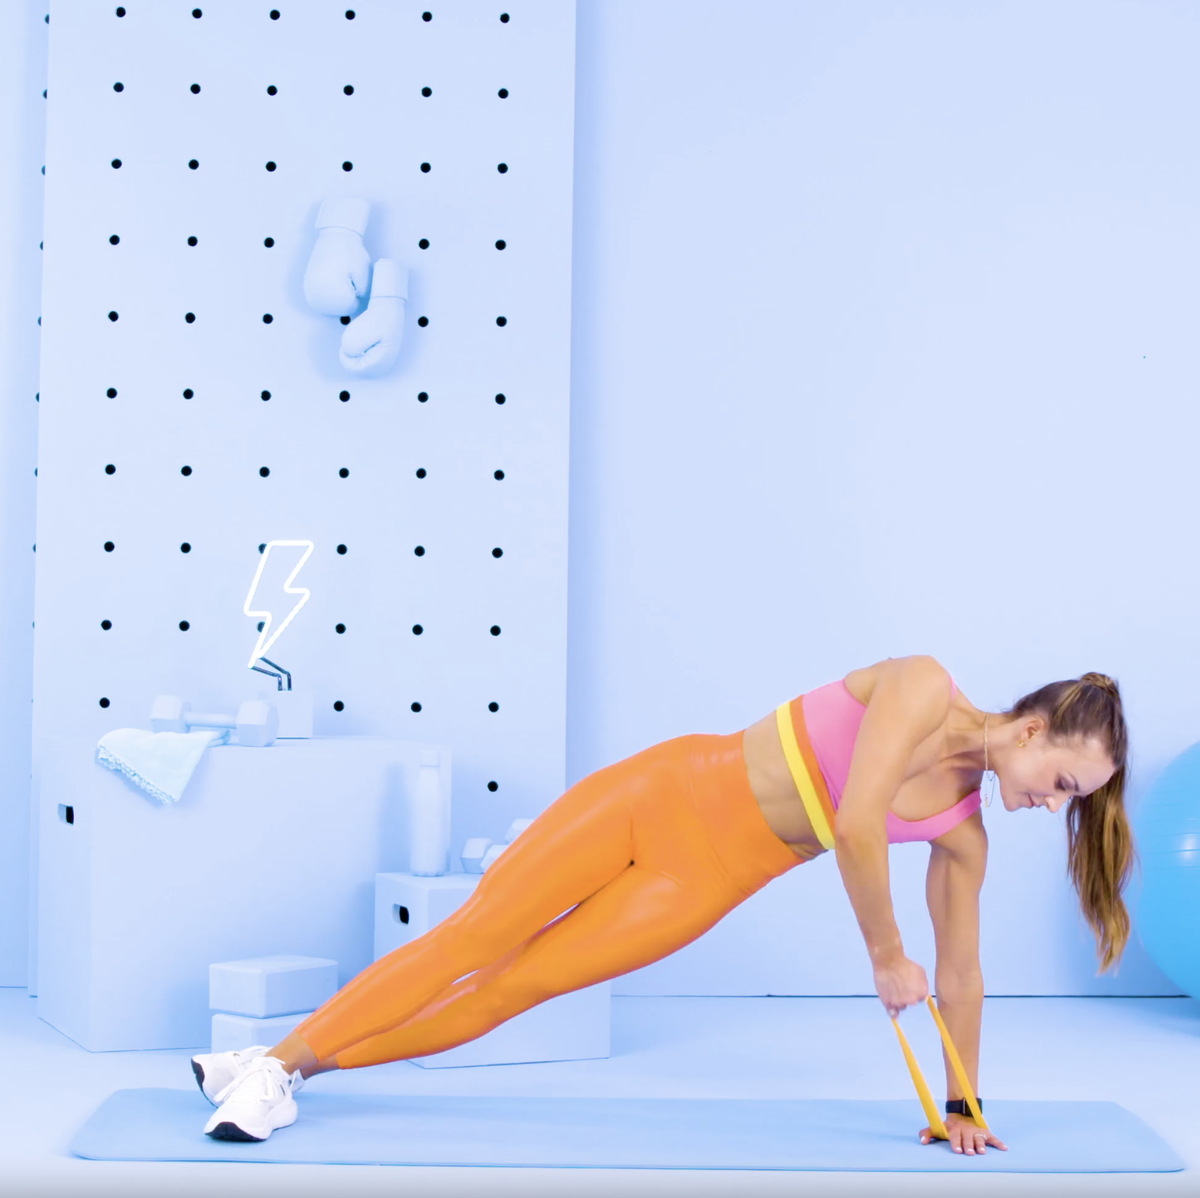 Here's how to work out at home with resistance bands